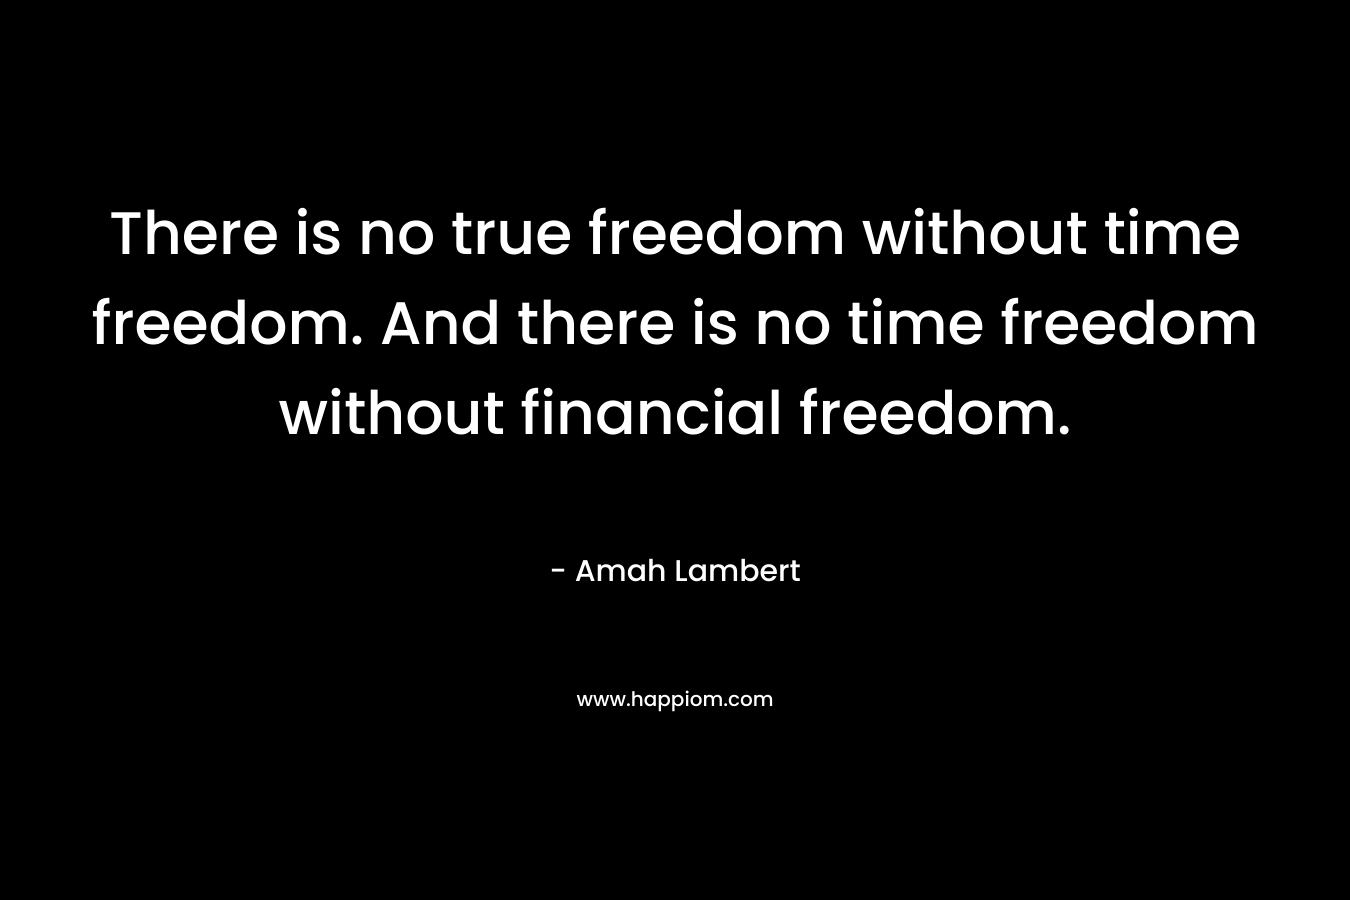 There is no true freedom without time freedom. And there is no time freedom without financial freedom.